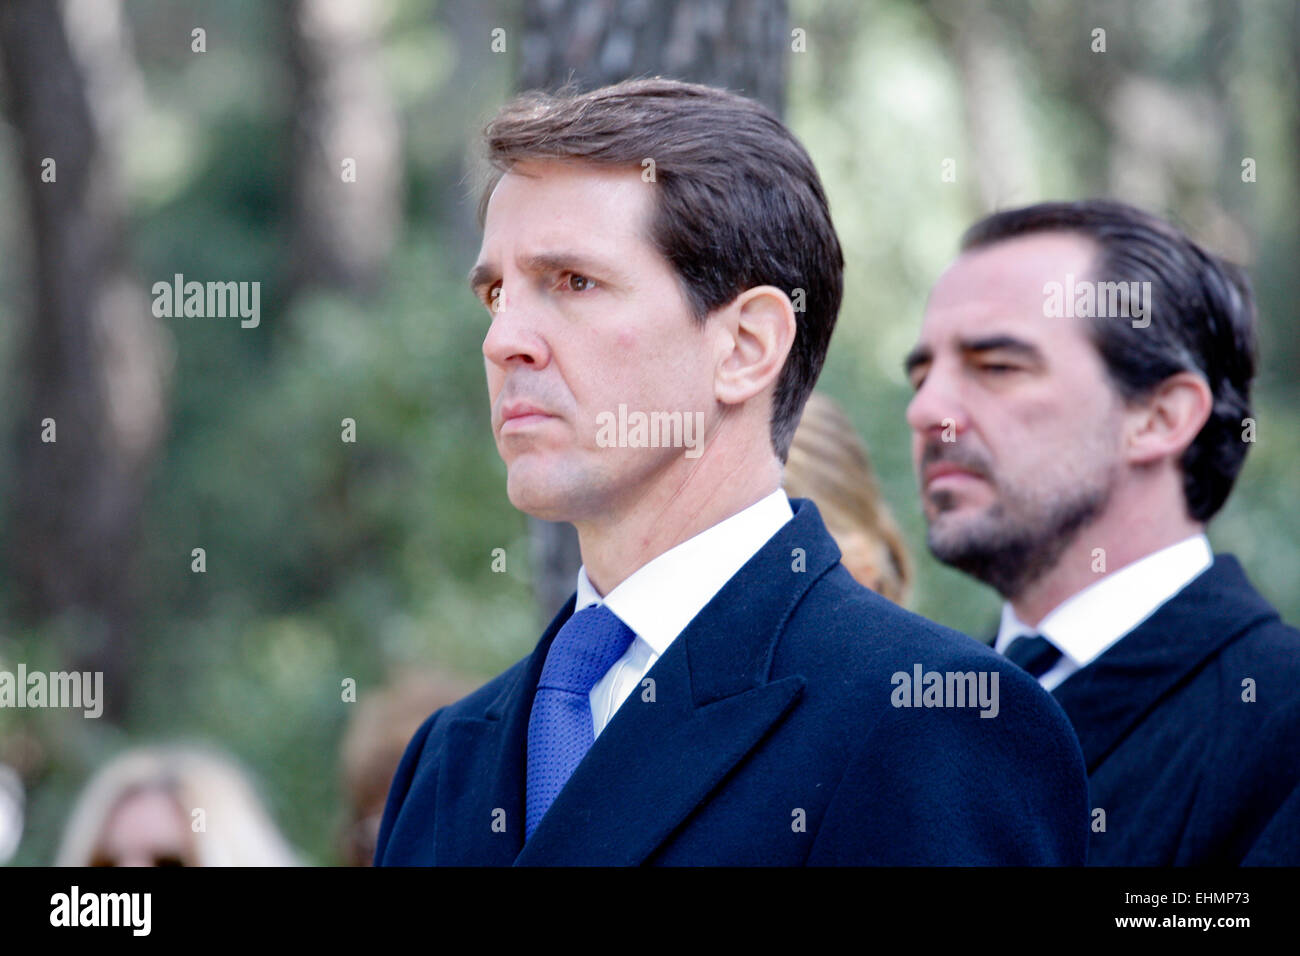 Tatoi, Greece. 16th Mar, 2015. Prince NIKOLAOS(L) and Prince PAVLOS of Greece attend the ceremony. The annual memorial service in honour of King Pavlos and Queen Frederika was held earlier today at Tatoi cemetery. The memorial service was held 5 km north of Athens's suburbs, at Tatoi Palace, the Greek Royals' former summer palace. Credit:  Aristidis Vafeiadakis/ZUMA Wire/Alamy Live News Stock Photo